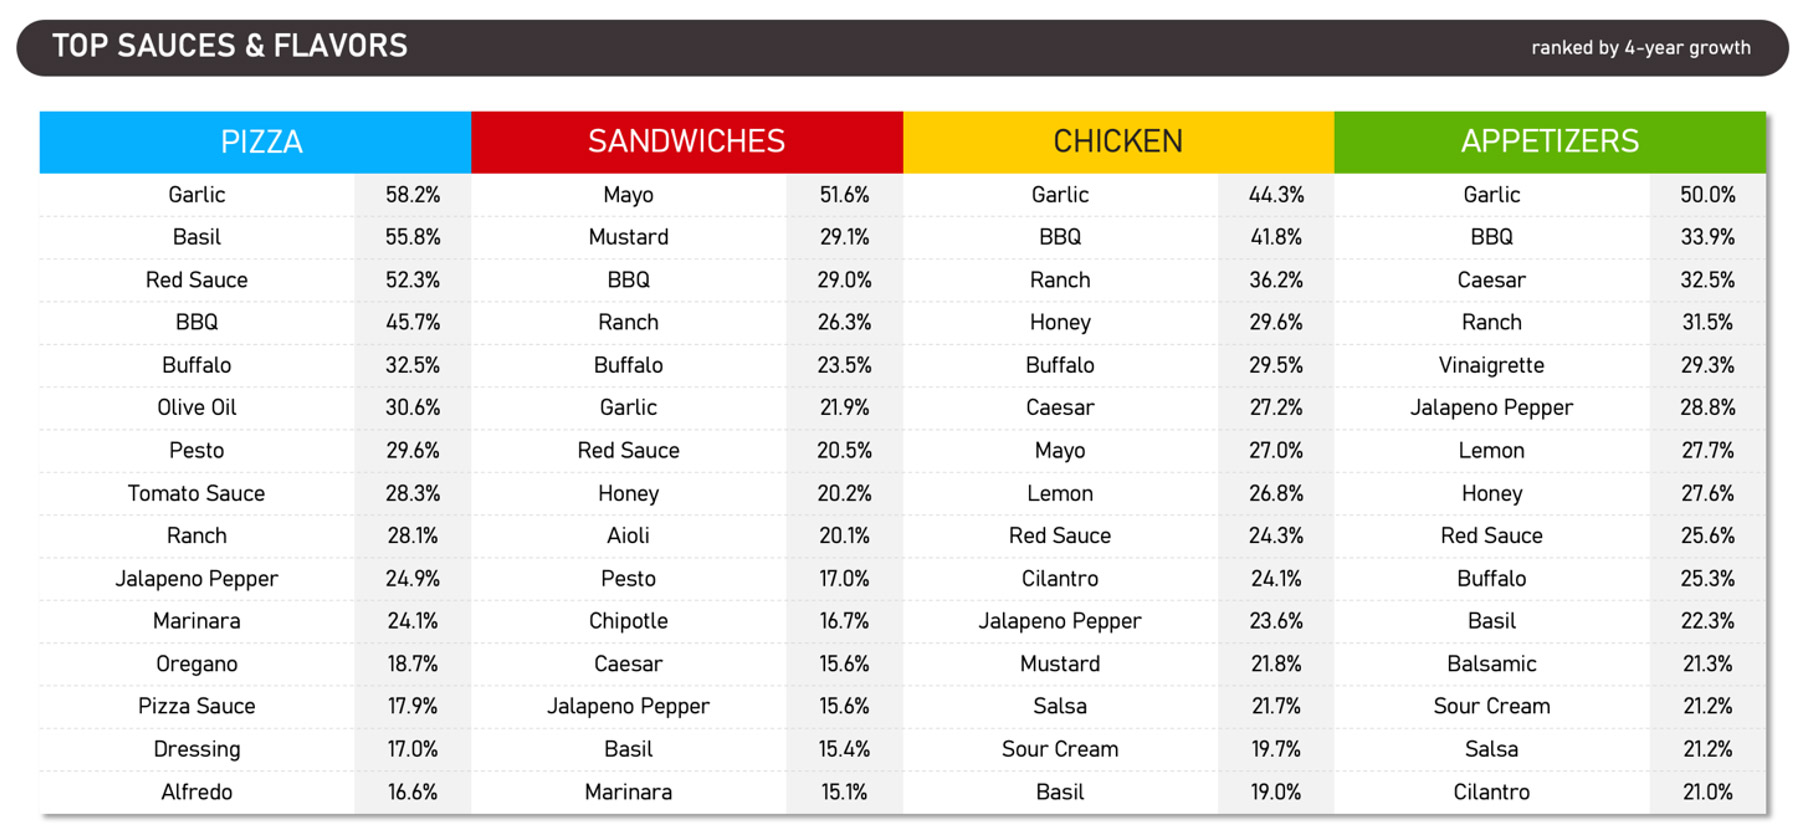 BBQ sauce has grown the most across multiple menu categories as a condiment.